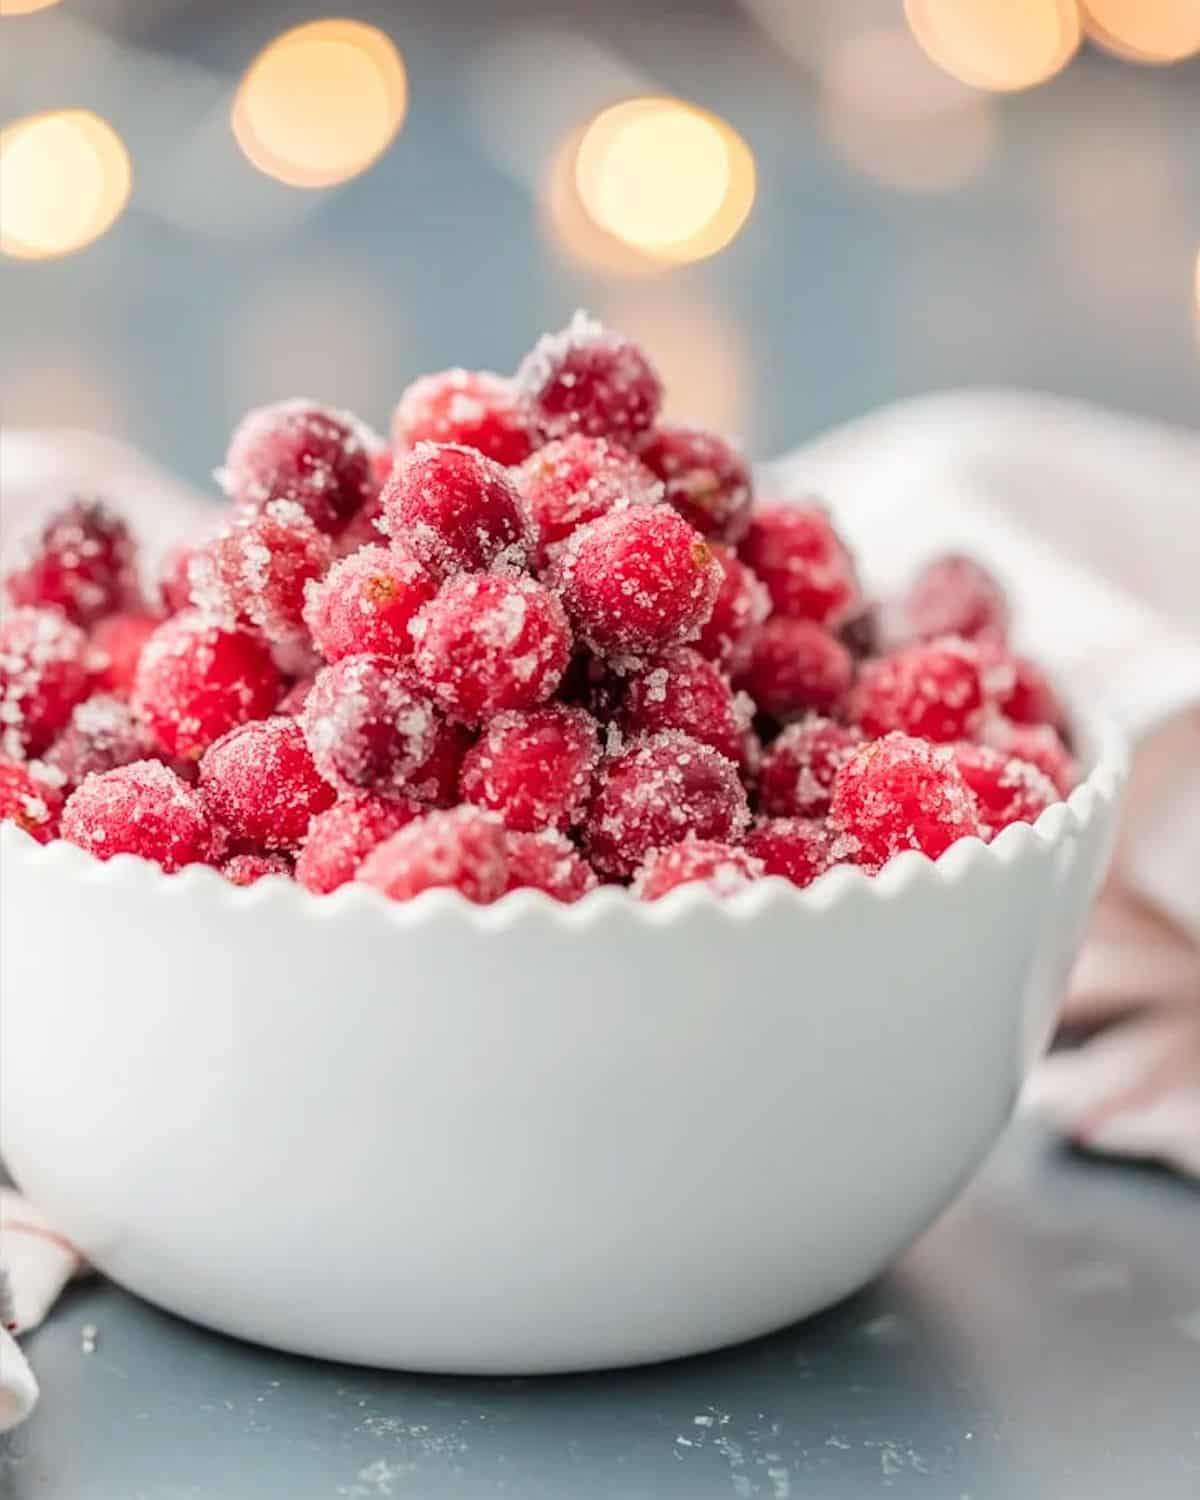 Can You Eat Raw Cranberries?